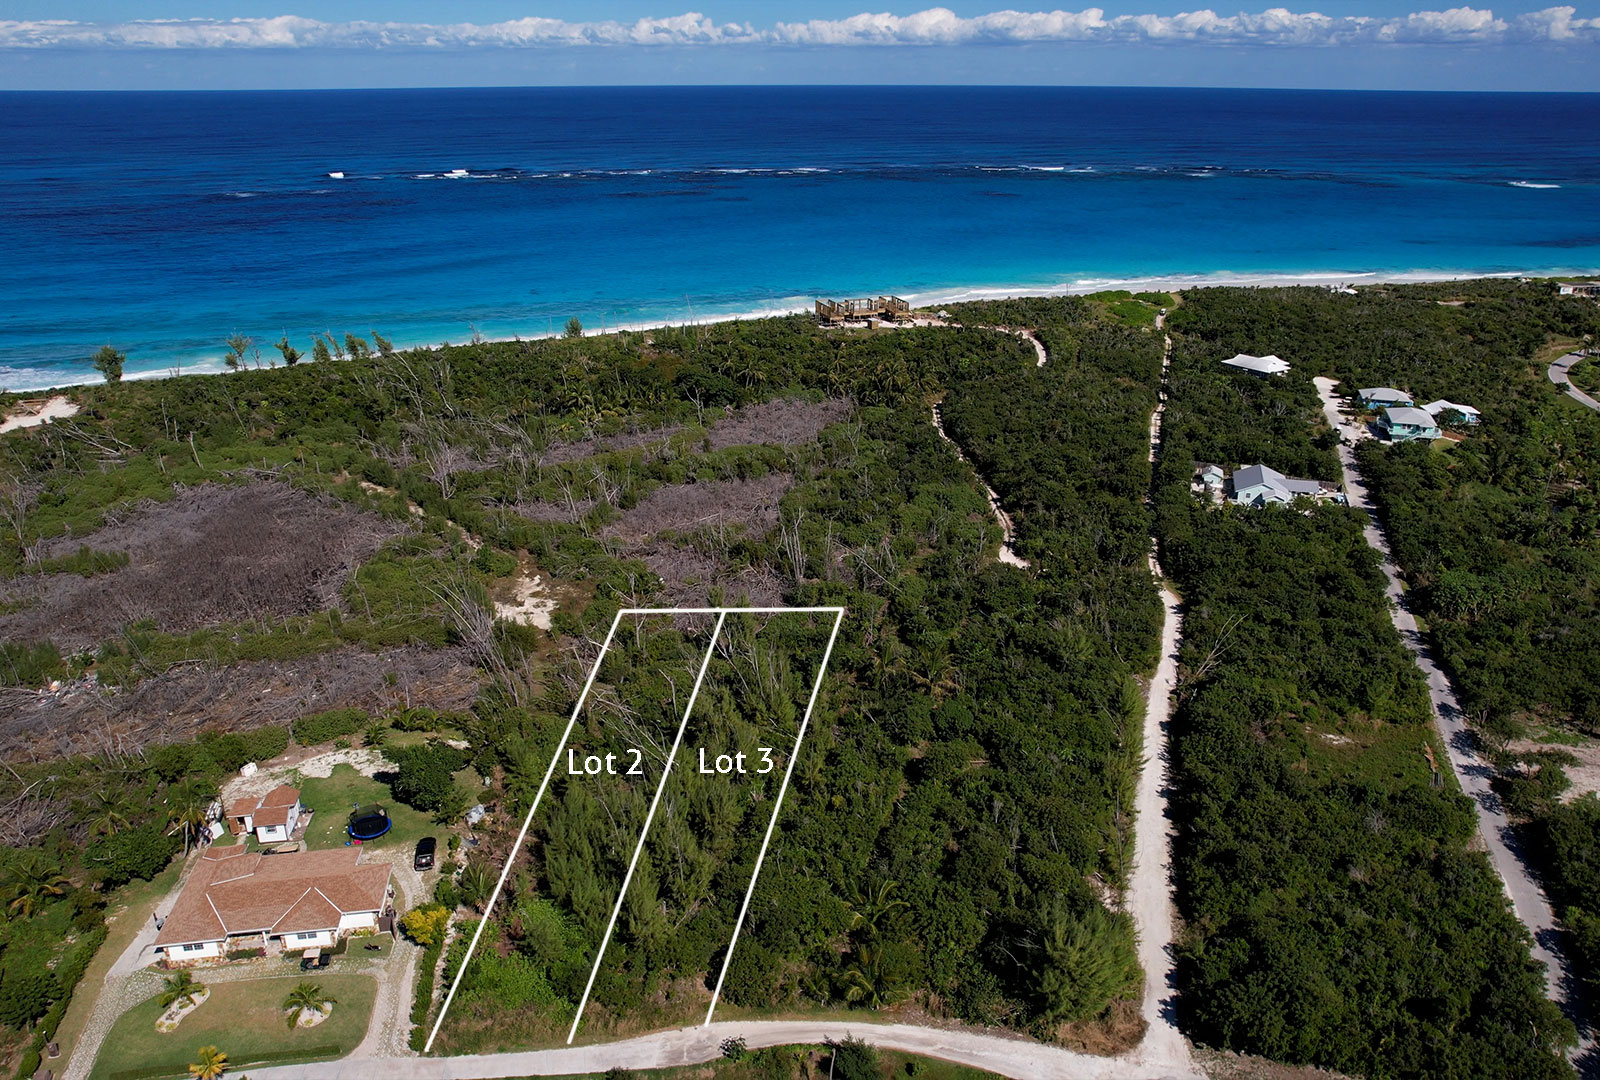 Lot #2 in the Settlment of Great Guana Cay